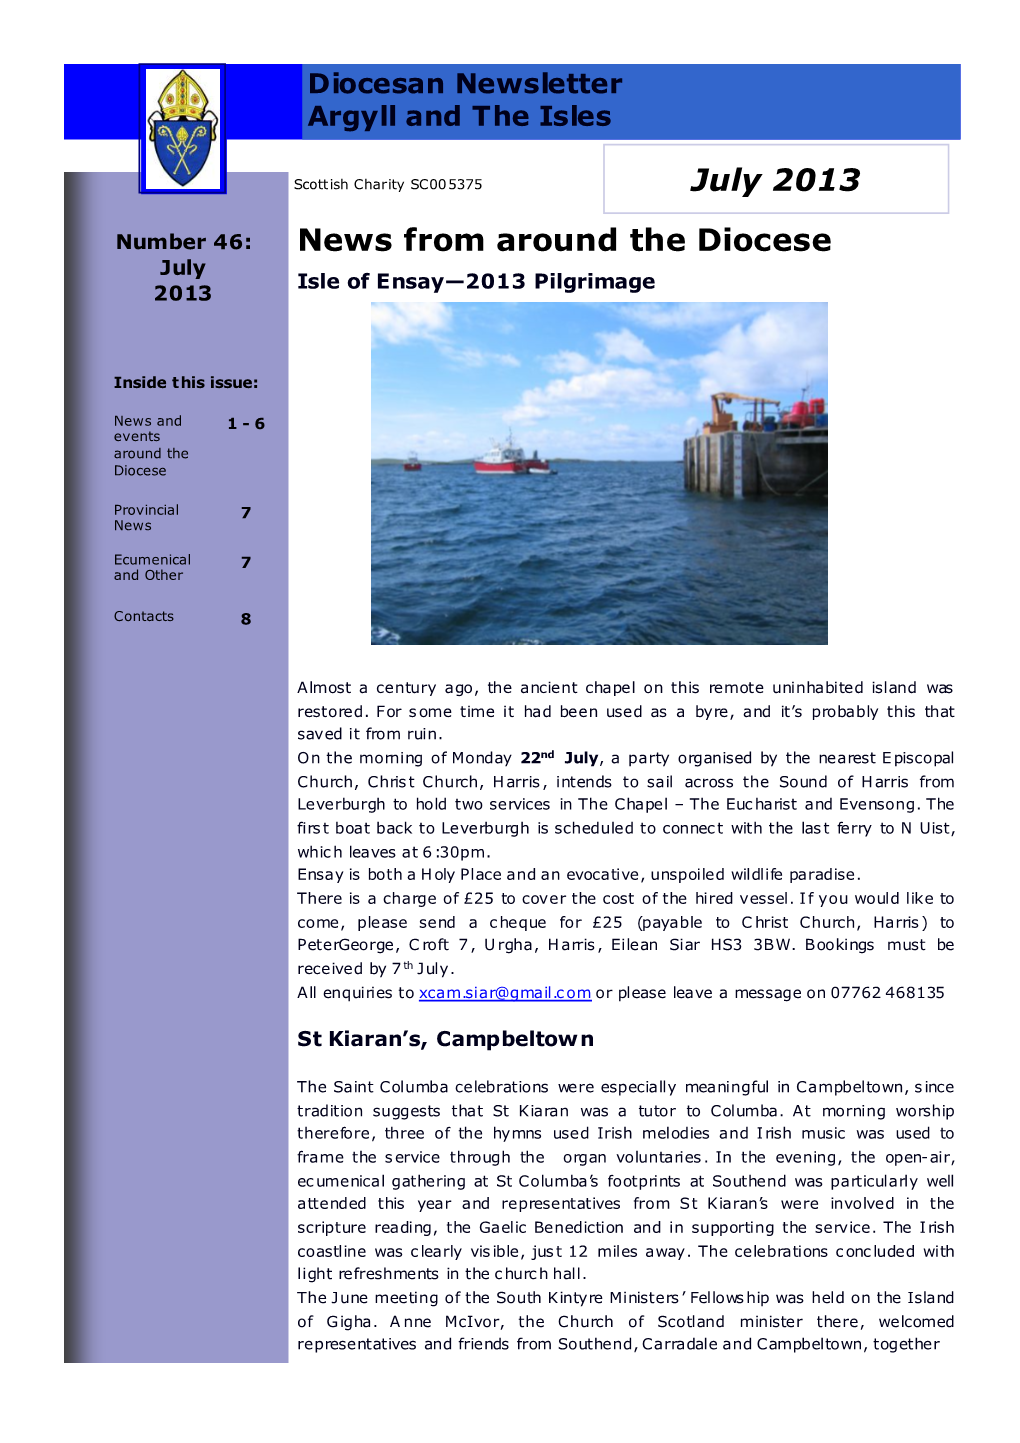 News from Around the Diocese July 2013